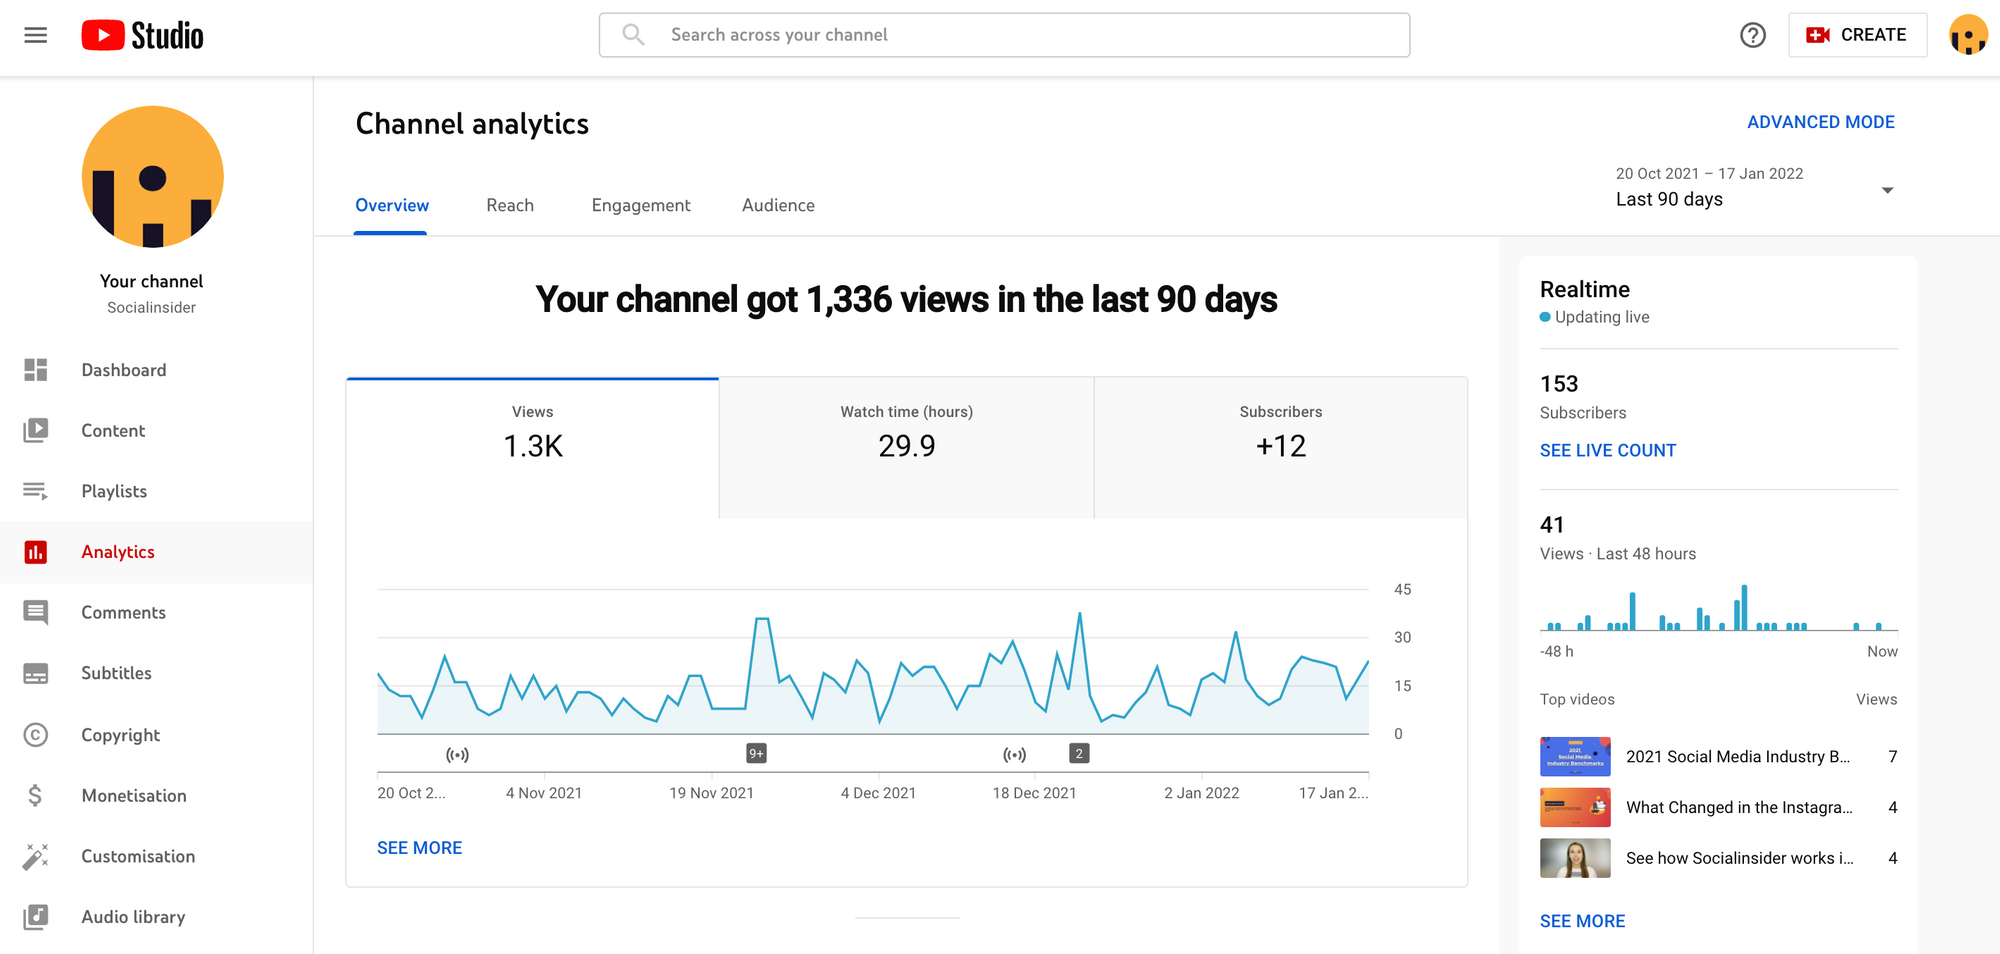 Here you can see how YouTube analytics are displayed in the native app.